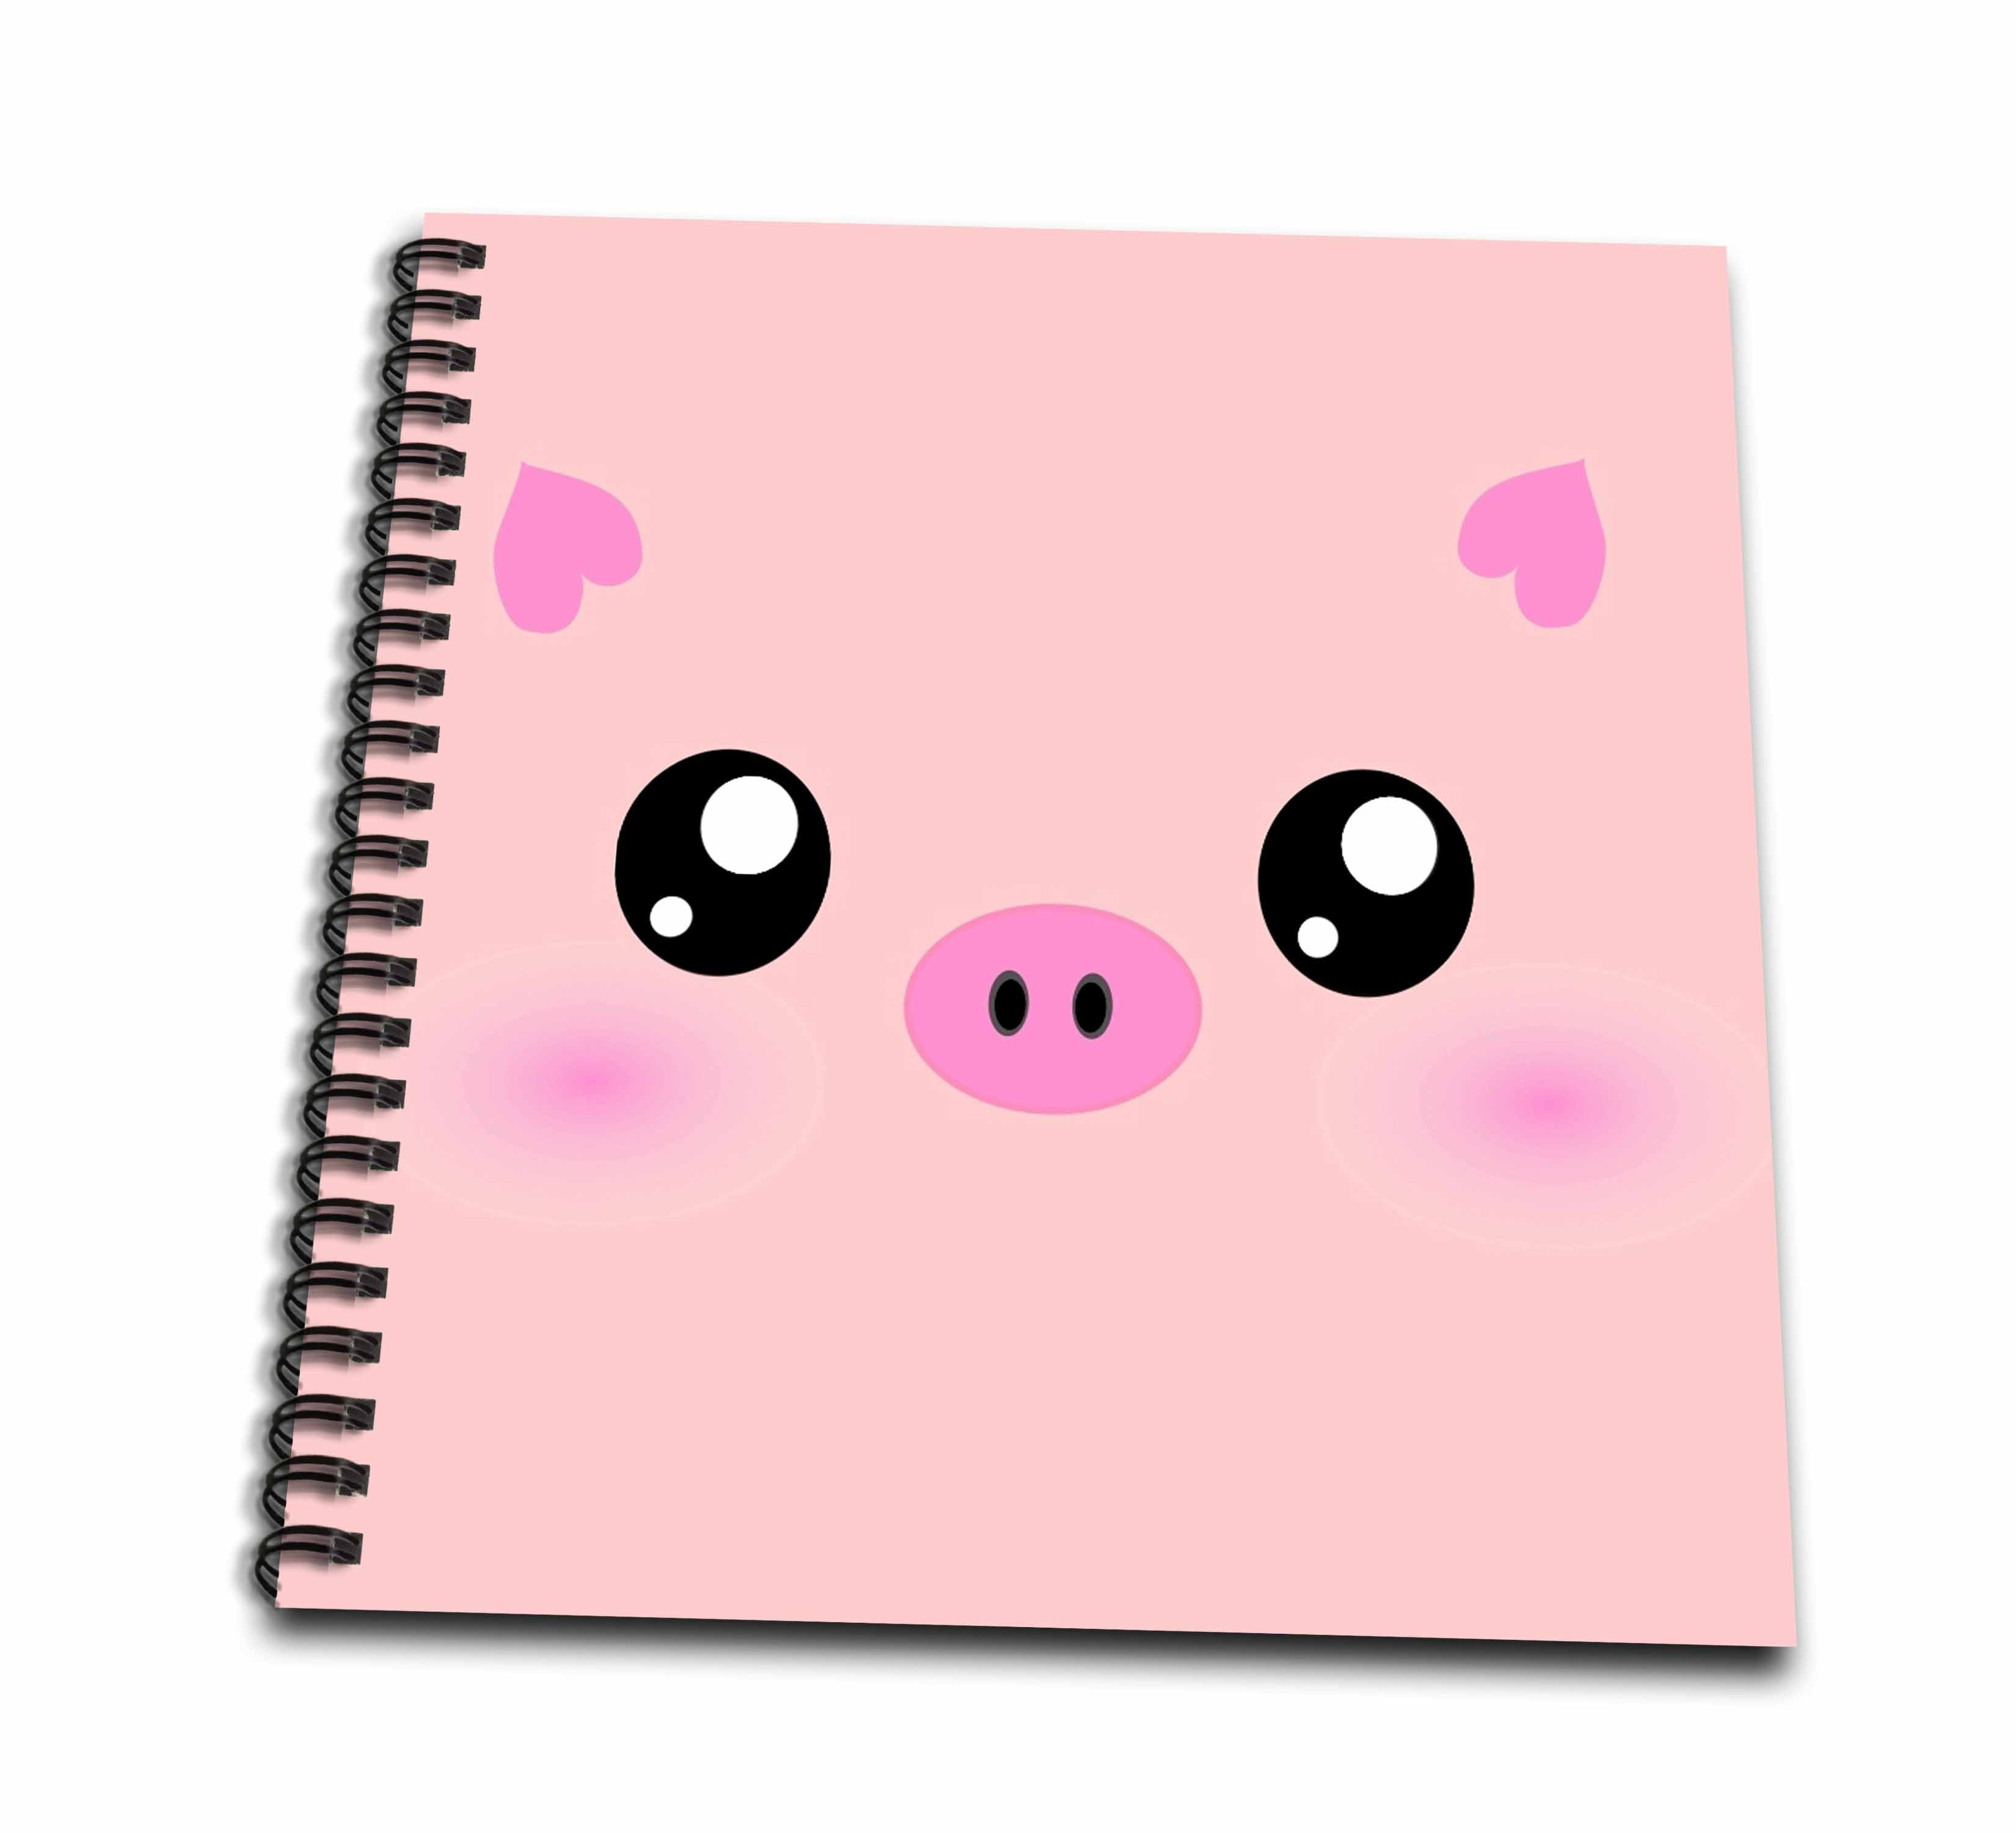 Cute Pig Sketchbook: Bleedproof sketchbook for Drawing, Sketching and  Writing. 120 pages. Paper size 8.5 x 11 . Cute pink pig cover book for kids  and